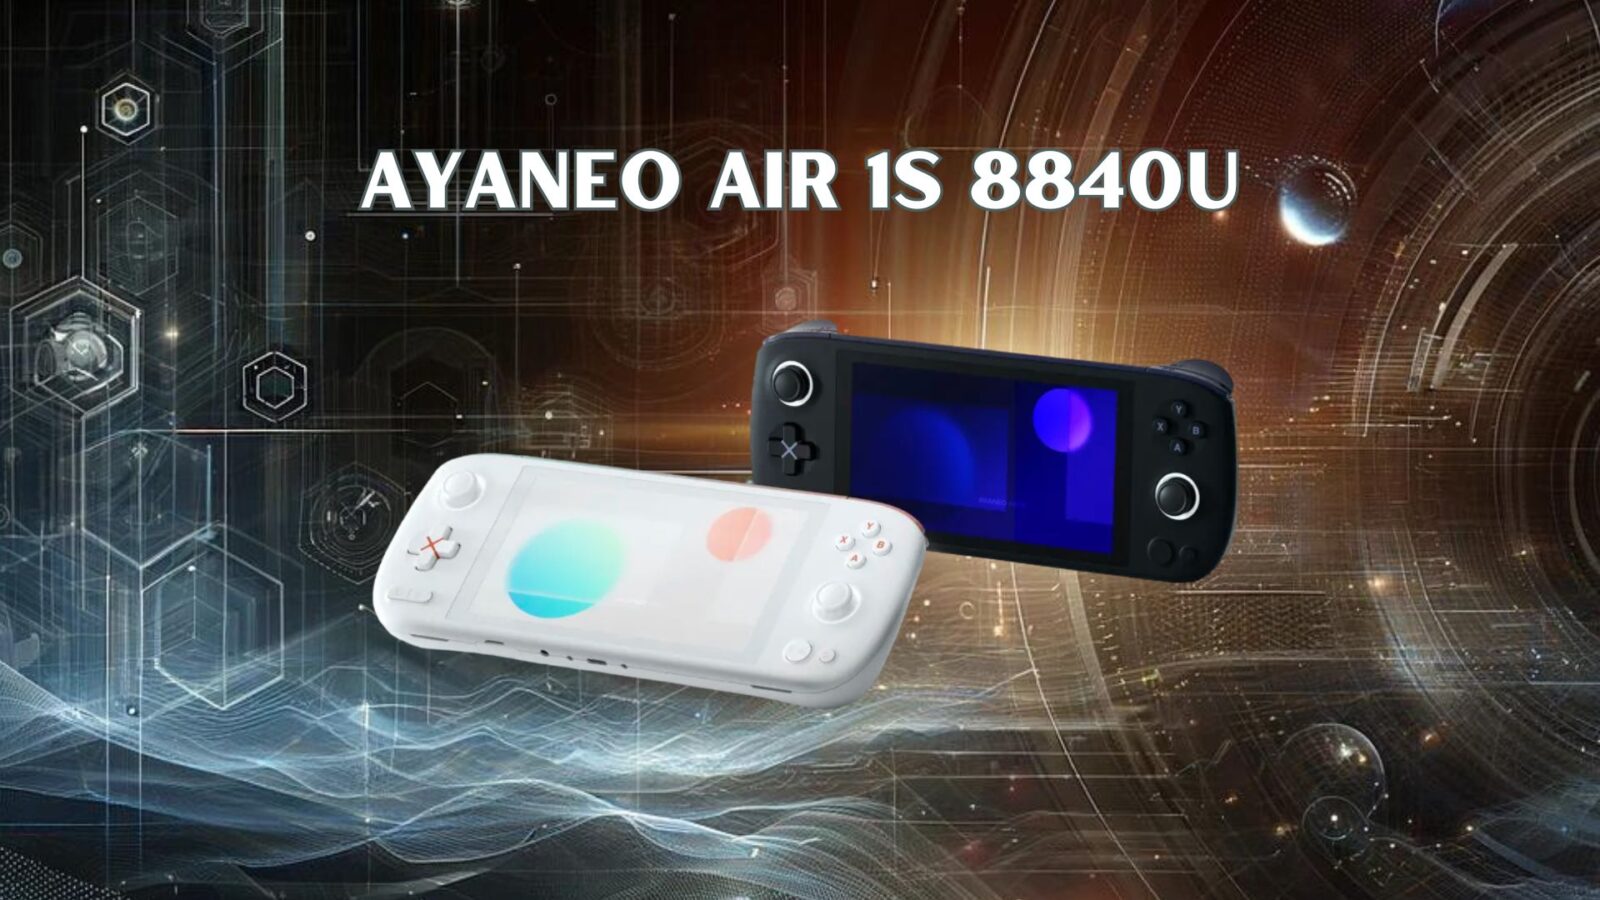 AYANEO AIR 1S 8840U announced